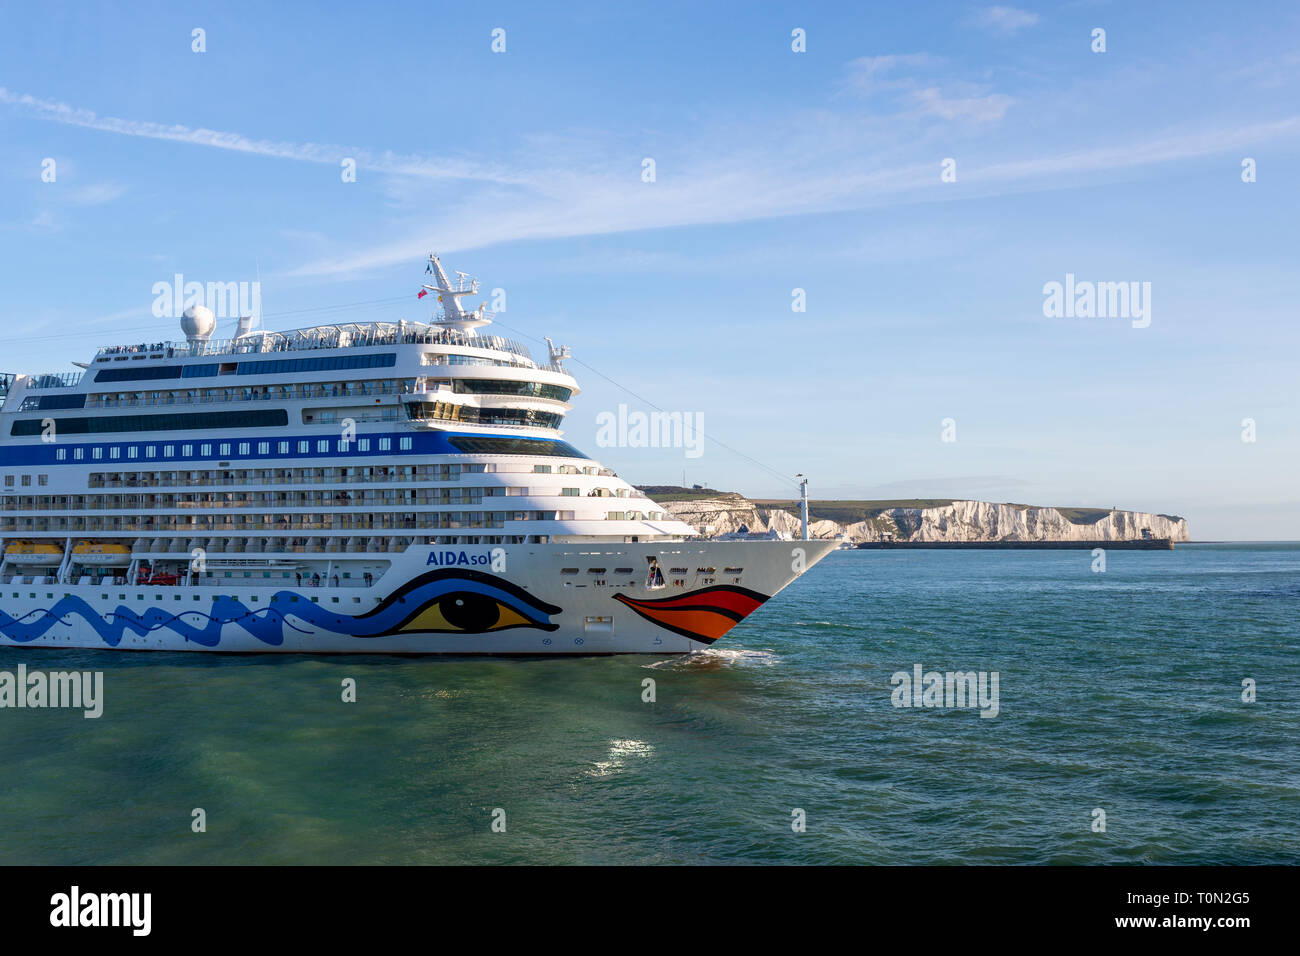 Aidasol cruise ship docking in the Port of Dover; with the iconic White Cliffs in the background. Stock Photo